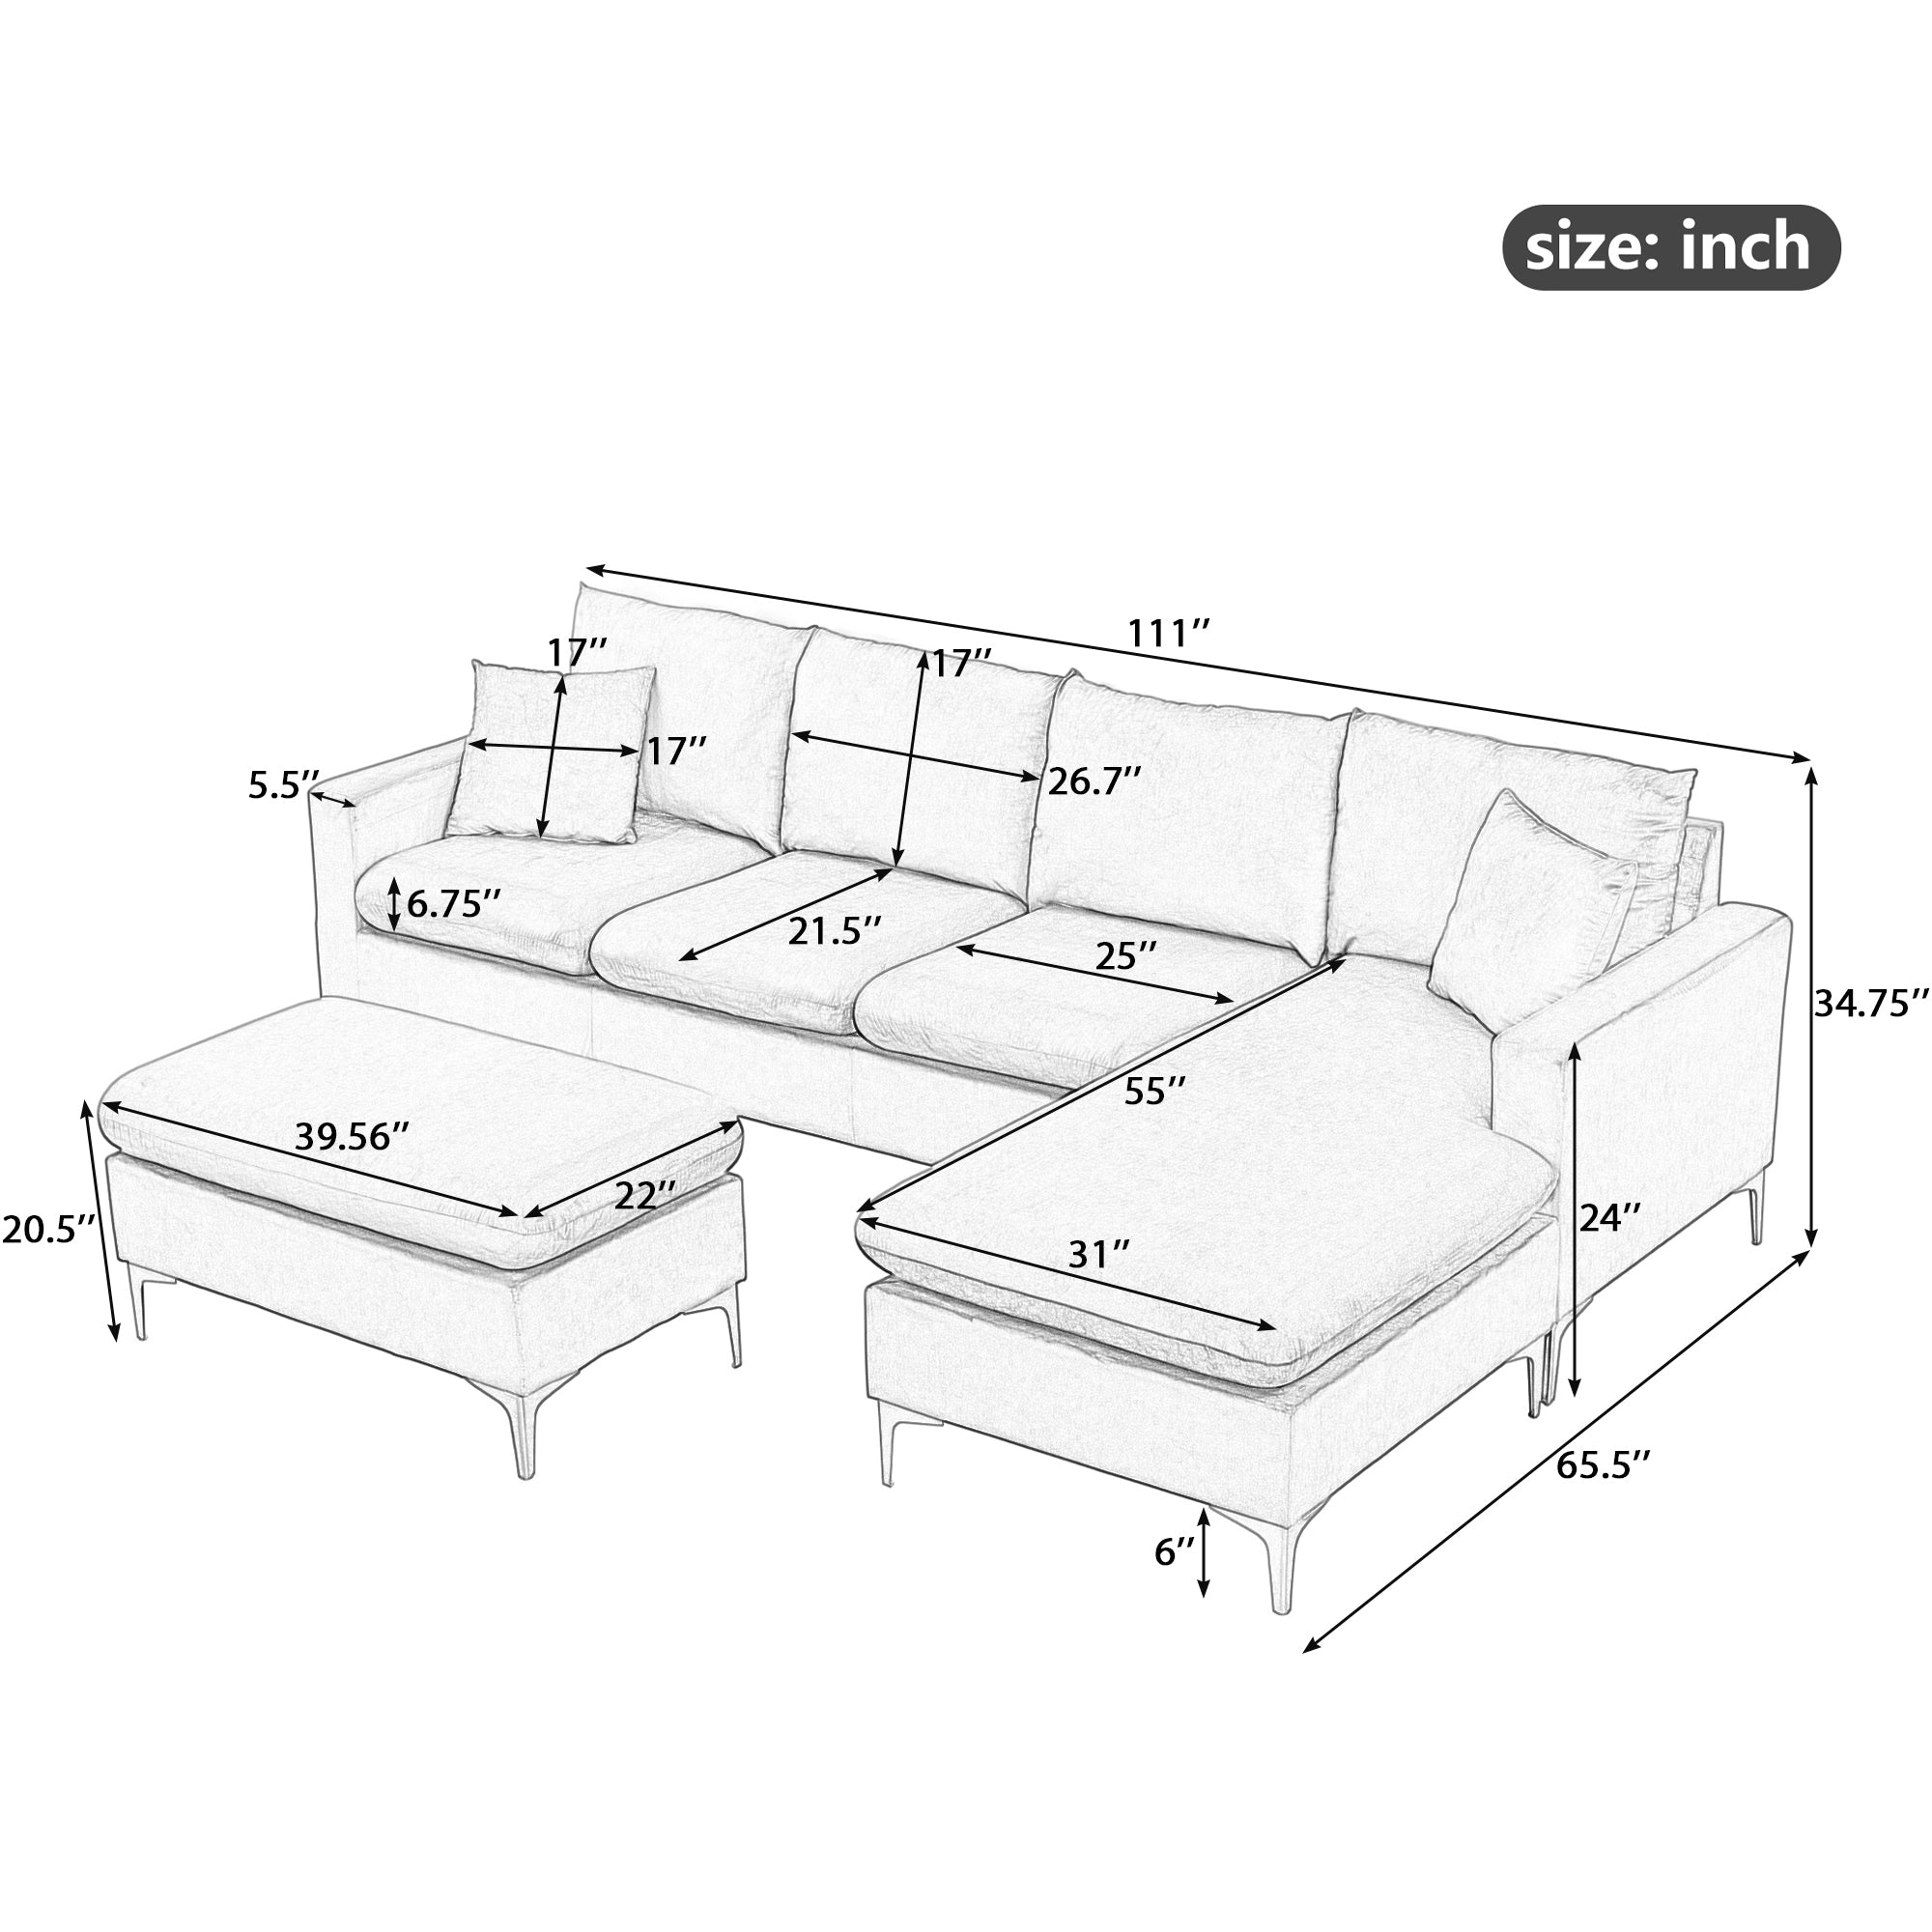 MAICOSY 110.6" Velvet L Shaped Sectional Sofa Bed Couches Chaise Ottoman Pillows, Cream White